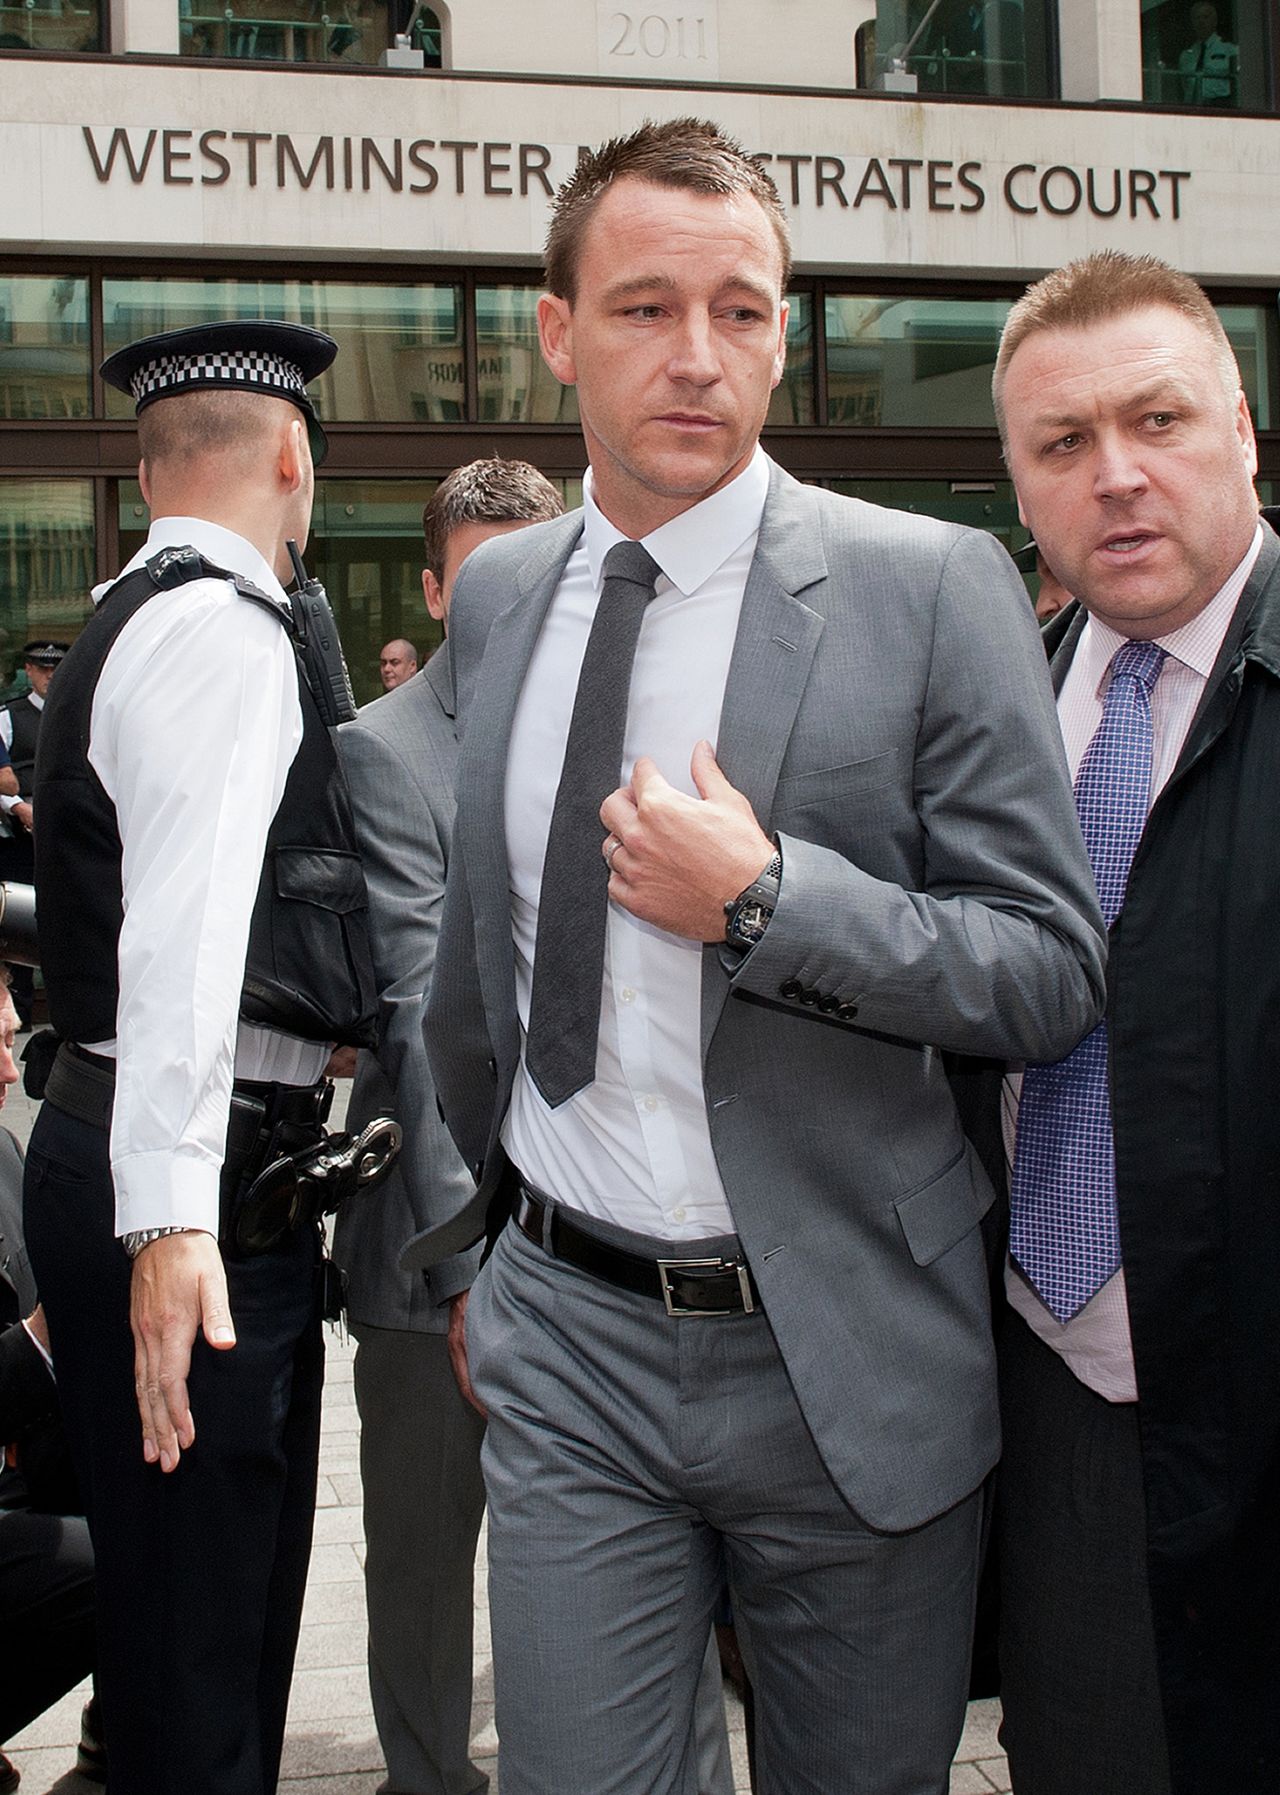 Former England captain John Terry was found not guilty in a criminal court of racially abusing rival footballer Anton Ferdinand but was banned for four-matches by the Football Association. He accepted the charge, a £220,000 fine and apologized, saying: "I accept that the language I used, regardless of the context, is not acceptable on the football field or indeed in any walk of life."